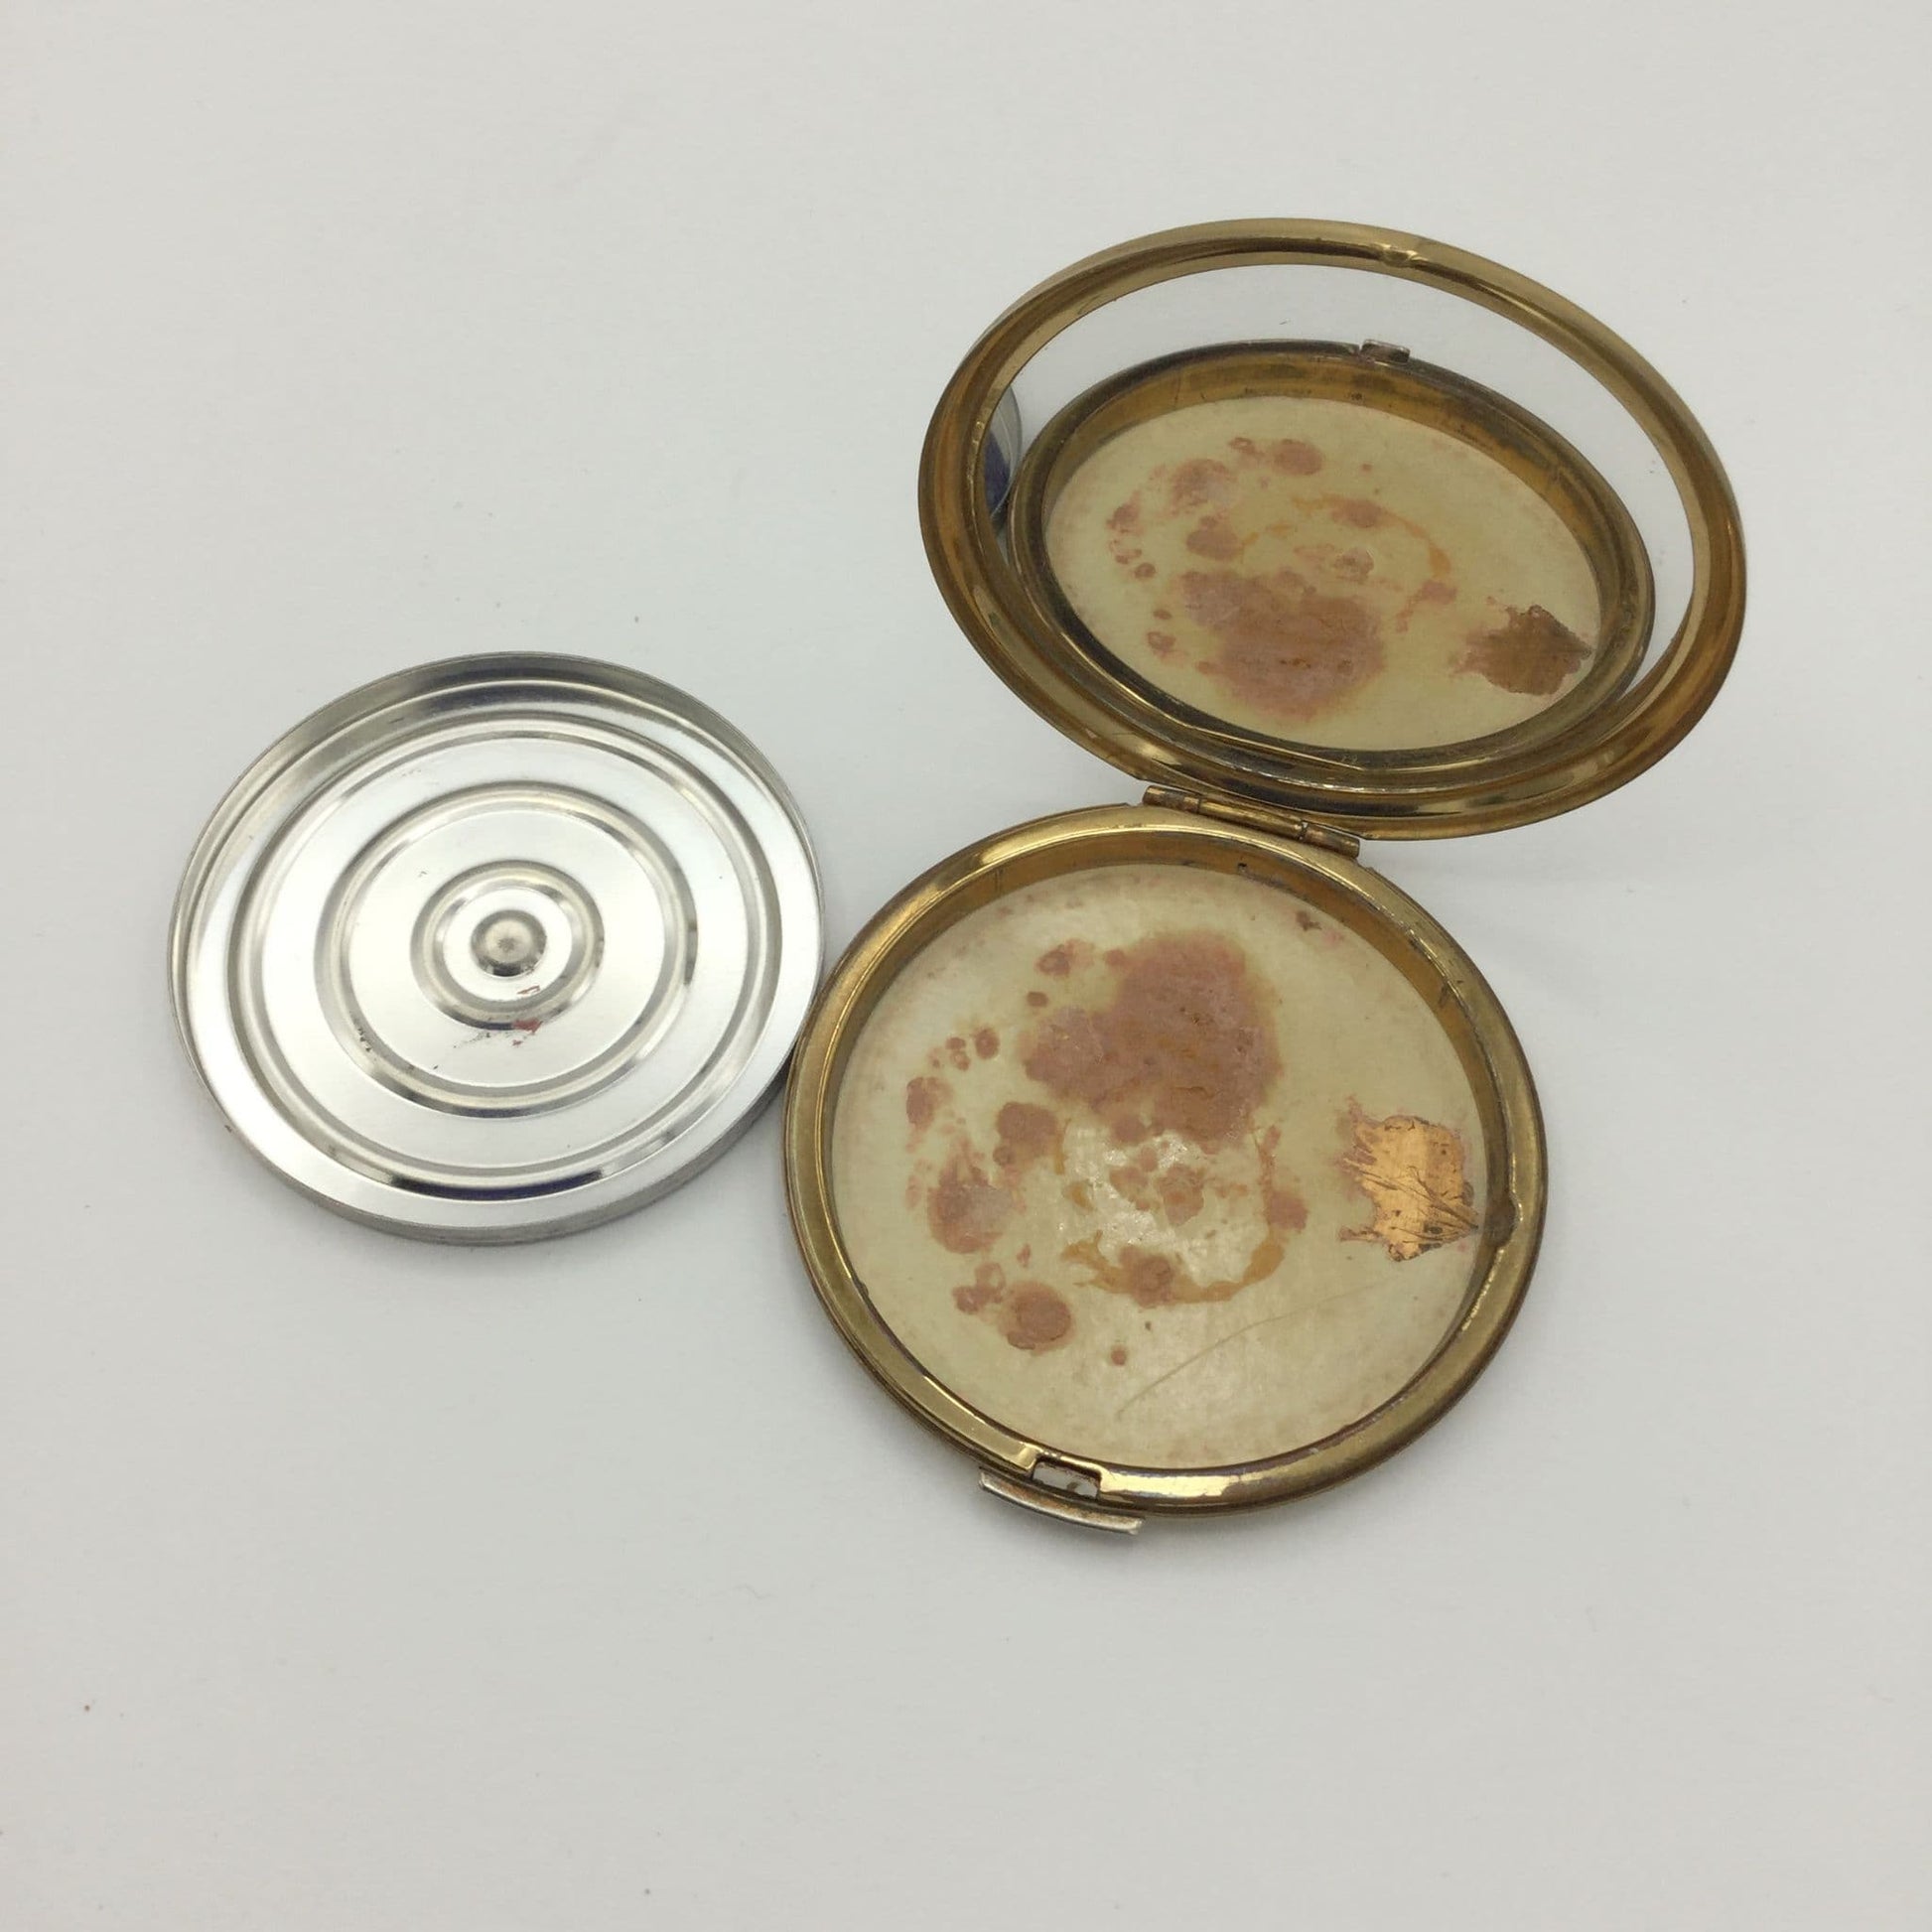 inside of Stratton mirror compact showing a relective mirror and a powder base to one side